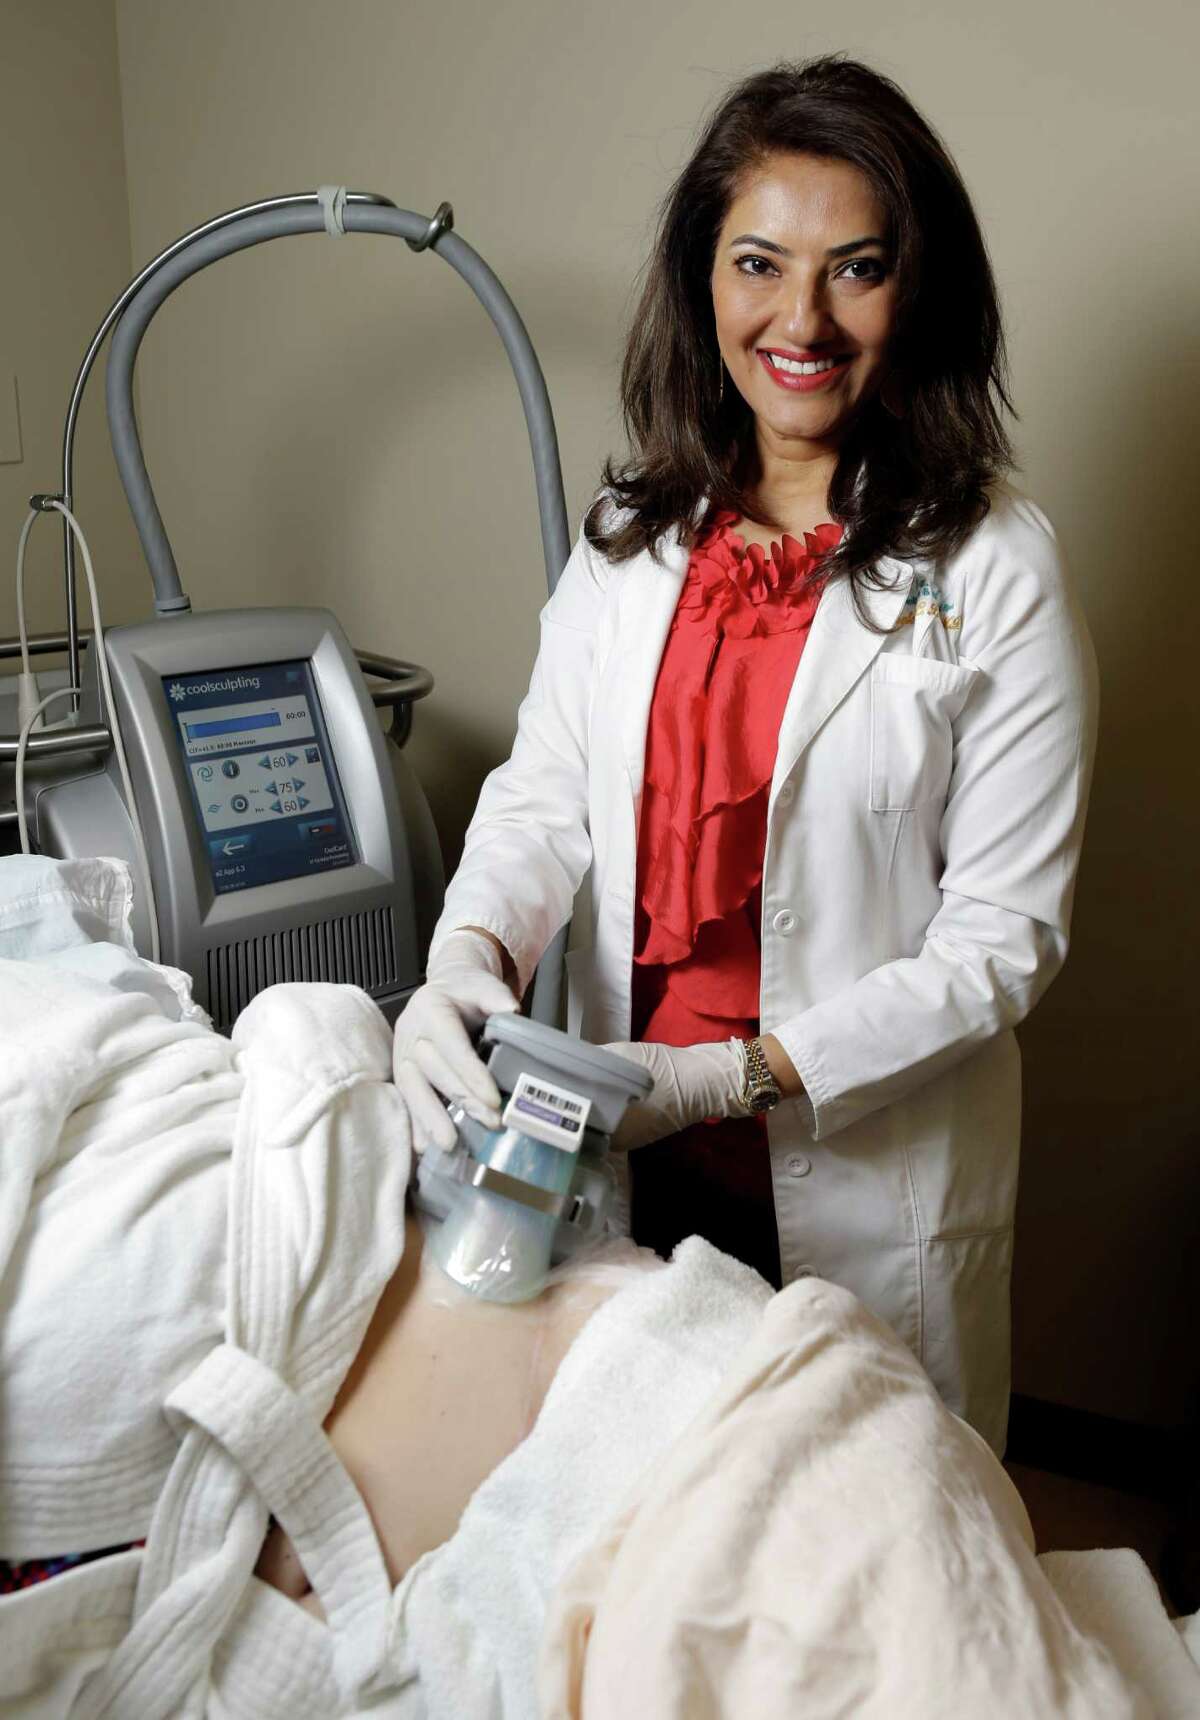 Dr. Shelena Lalji uses the CoolSculpting applicator to freeze a patient's fat cells. The procedure is designed to target exercise-resistant areas.